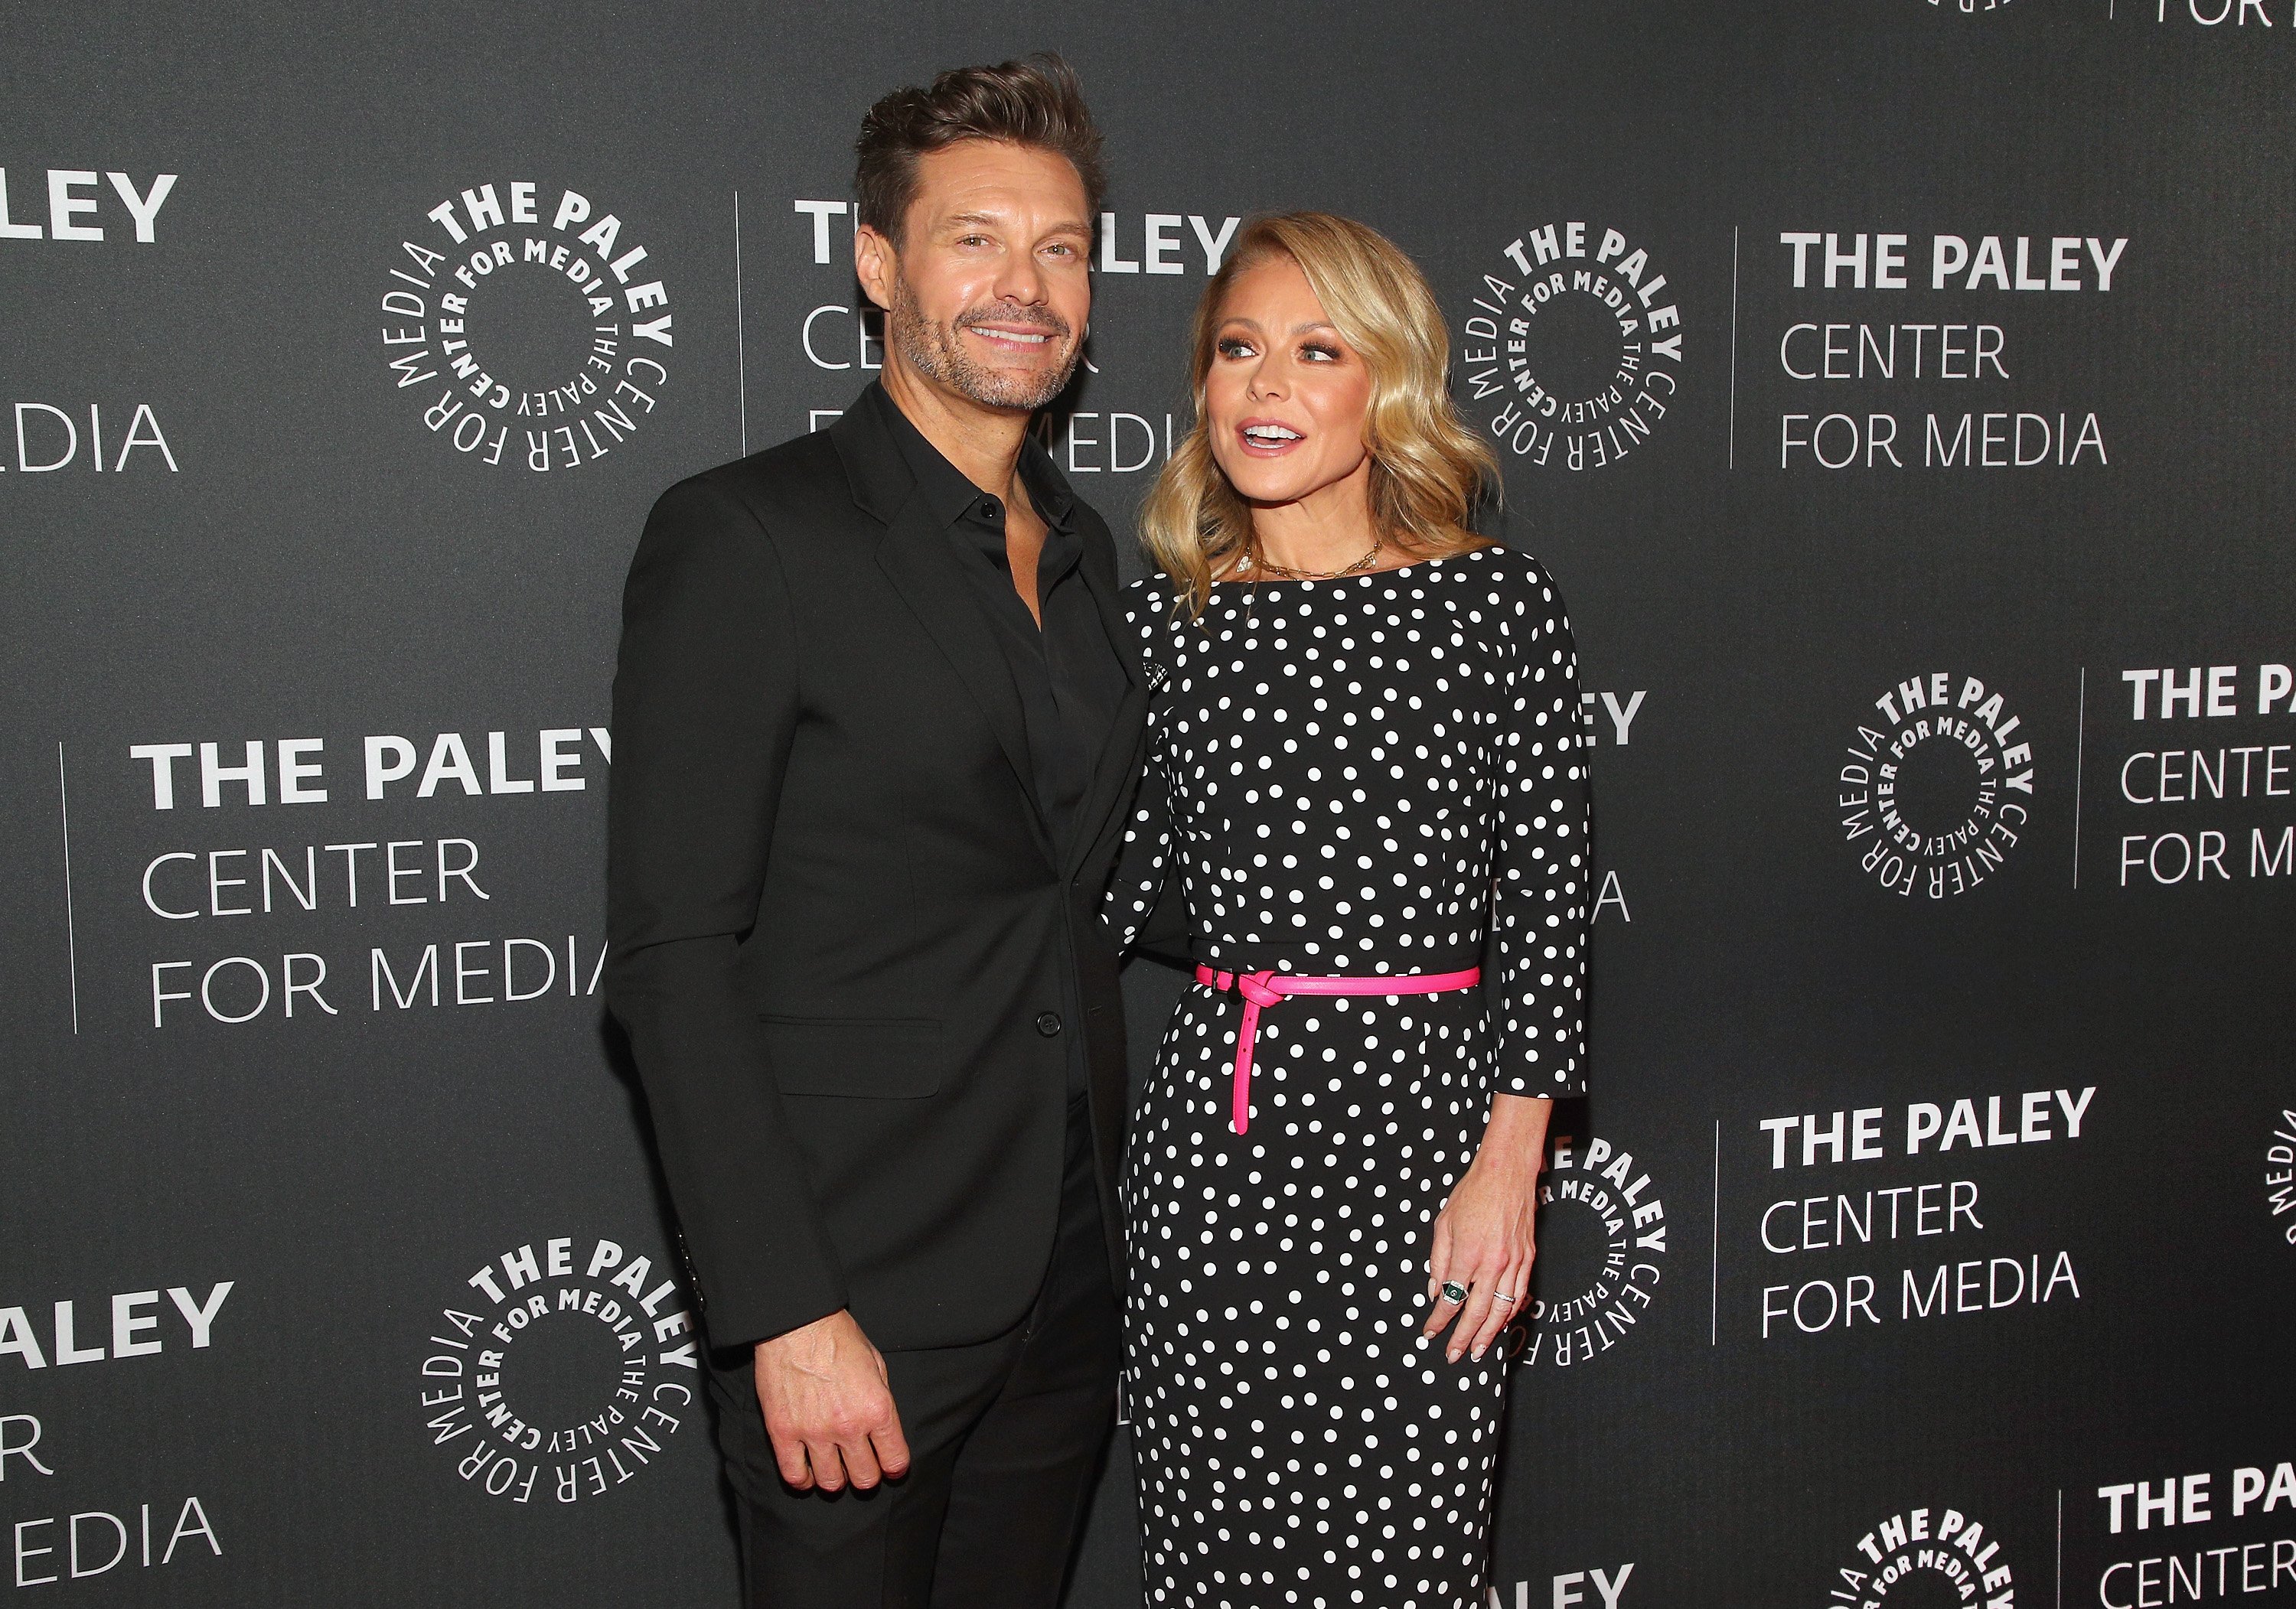 Ryan Seacrest and Kelly Ripa at Paley Center For Media on March 04, 2020. | Photo: Getty Images.